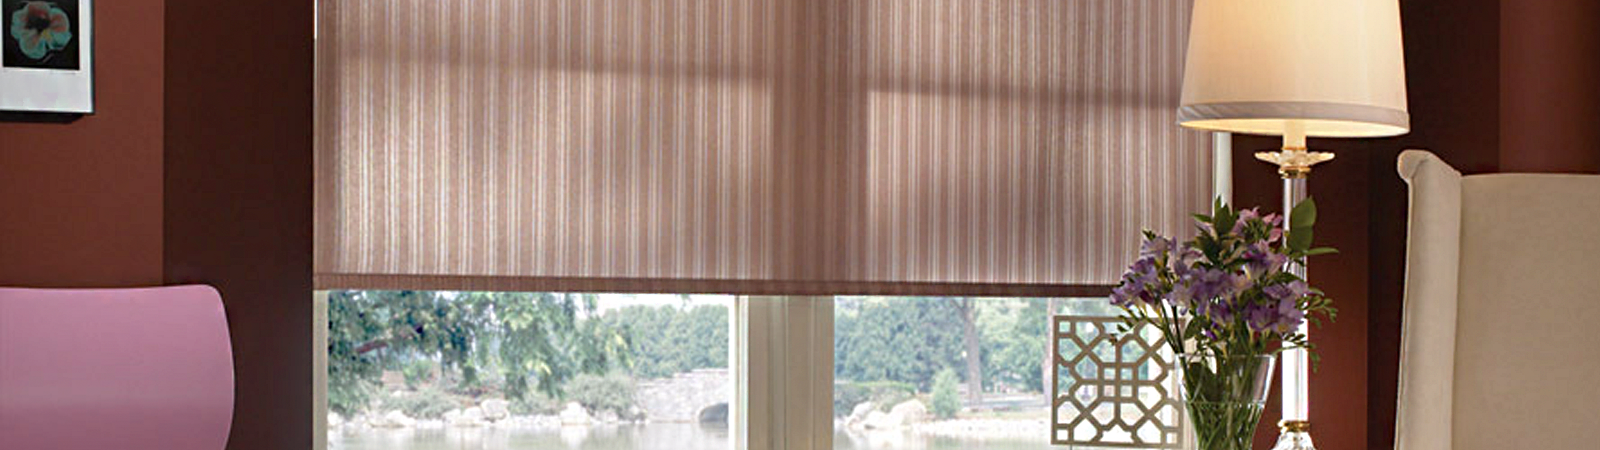 Hunter Douglas Roller Window Blinds, Remote Controlled Curtains And Blinds Japan